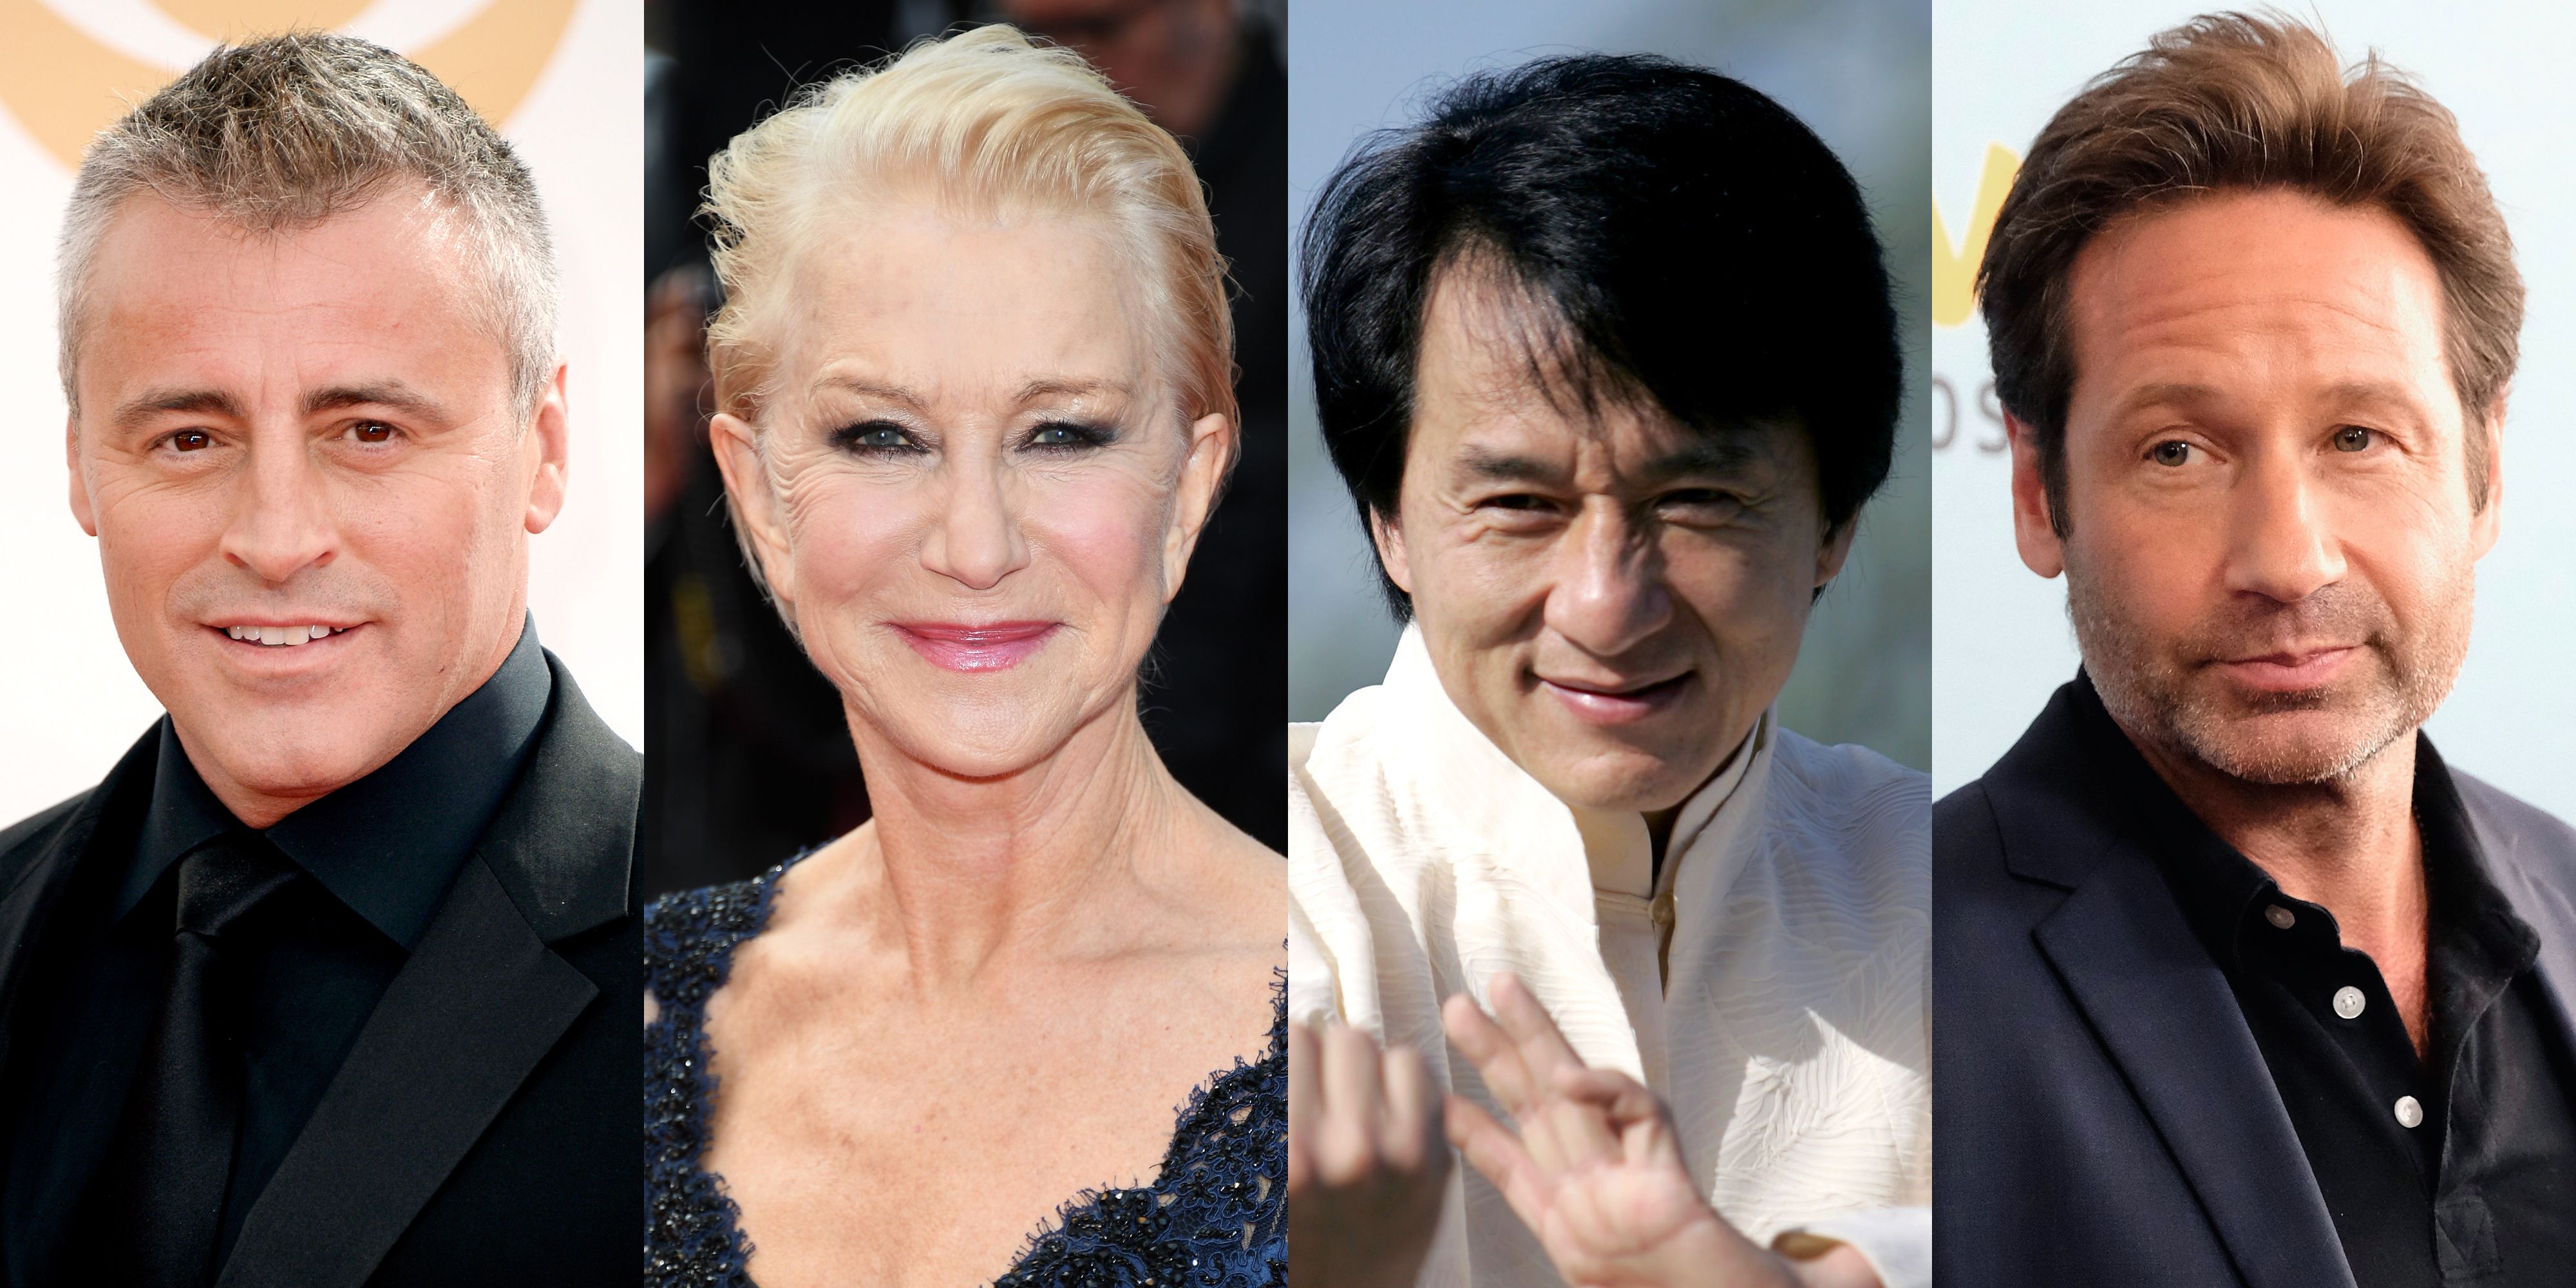 Xxx Movie Jackie Chan - Actors Who Got Their Start in Porn - Actors Who Starred in Adult Films